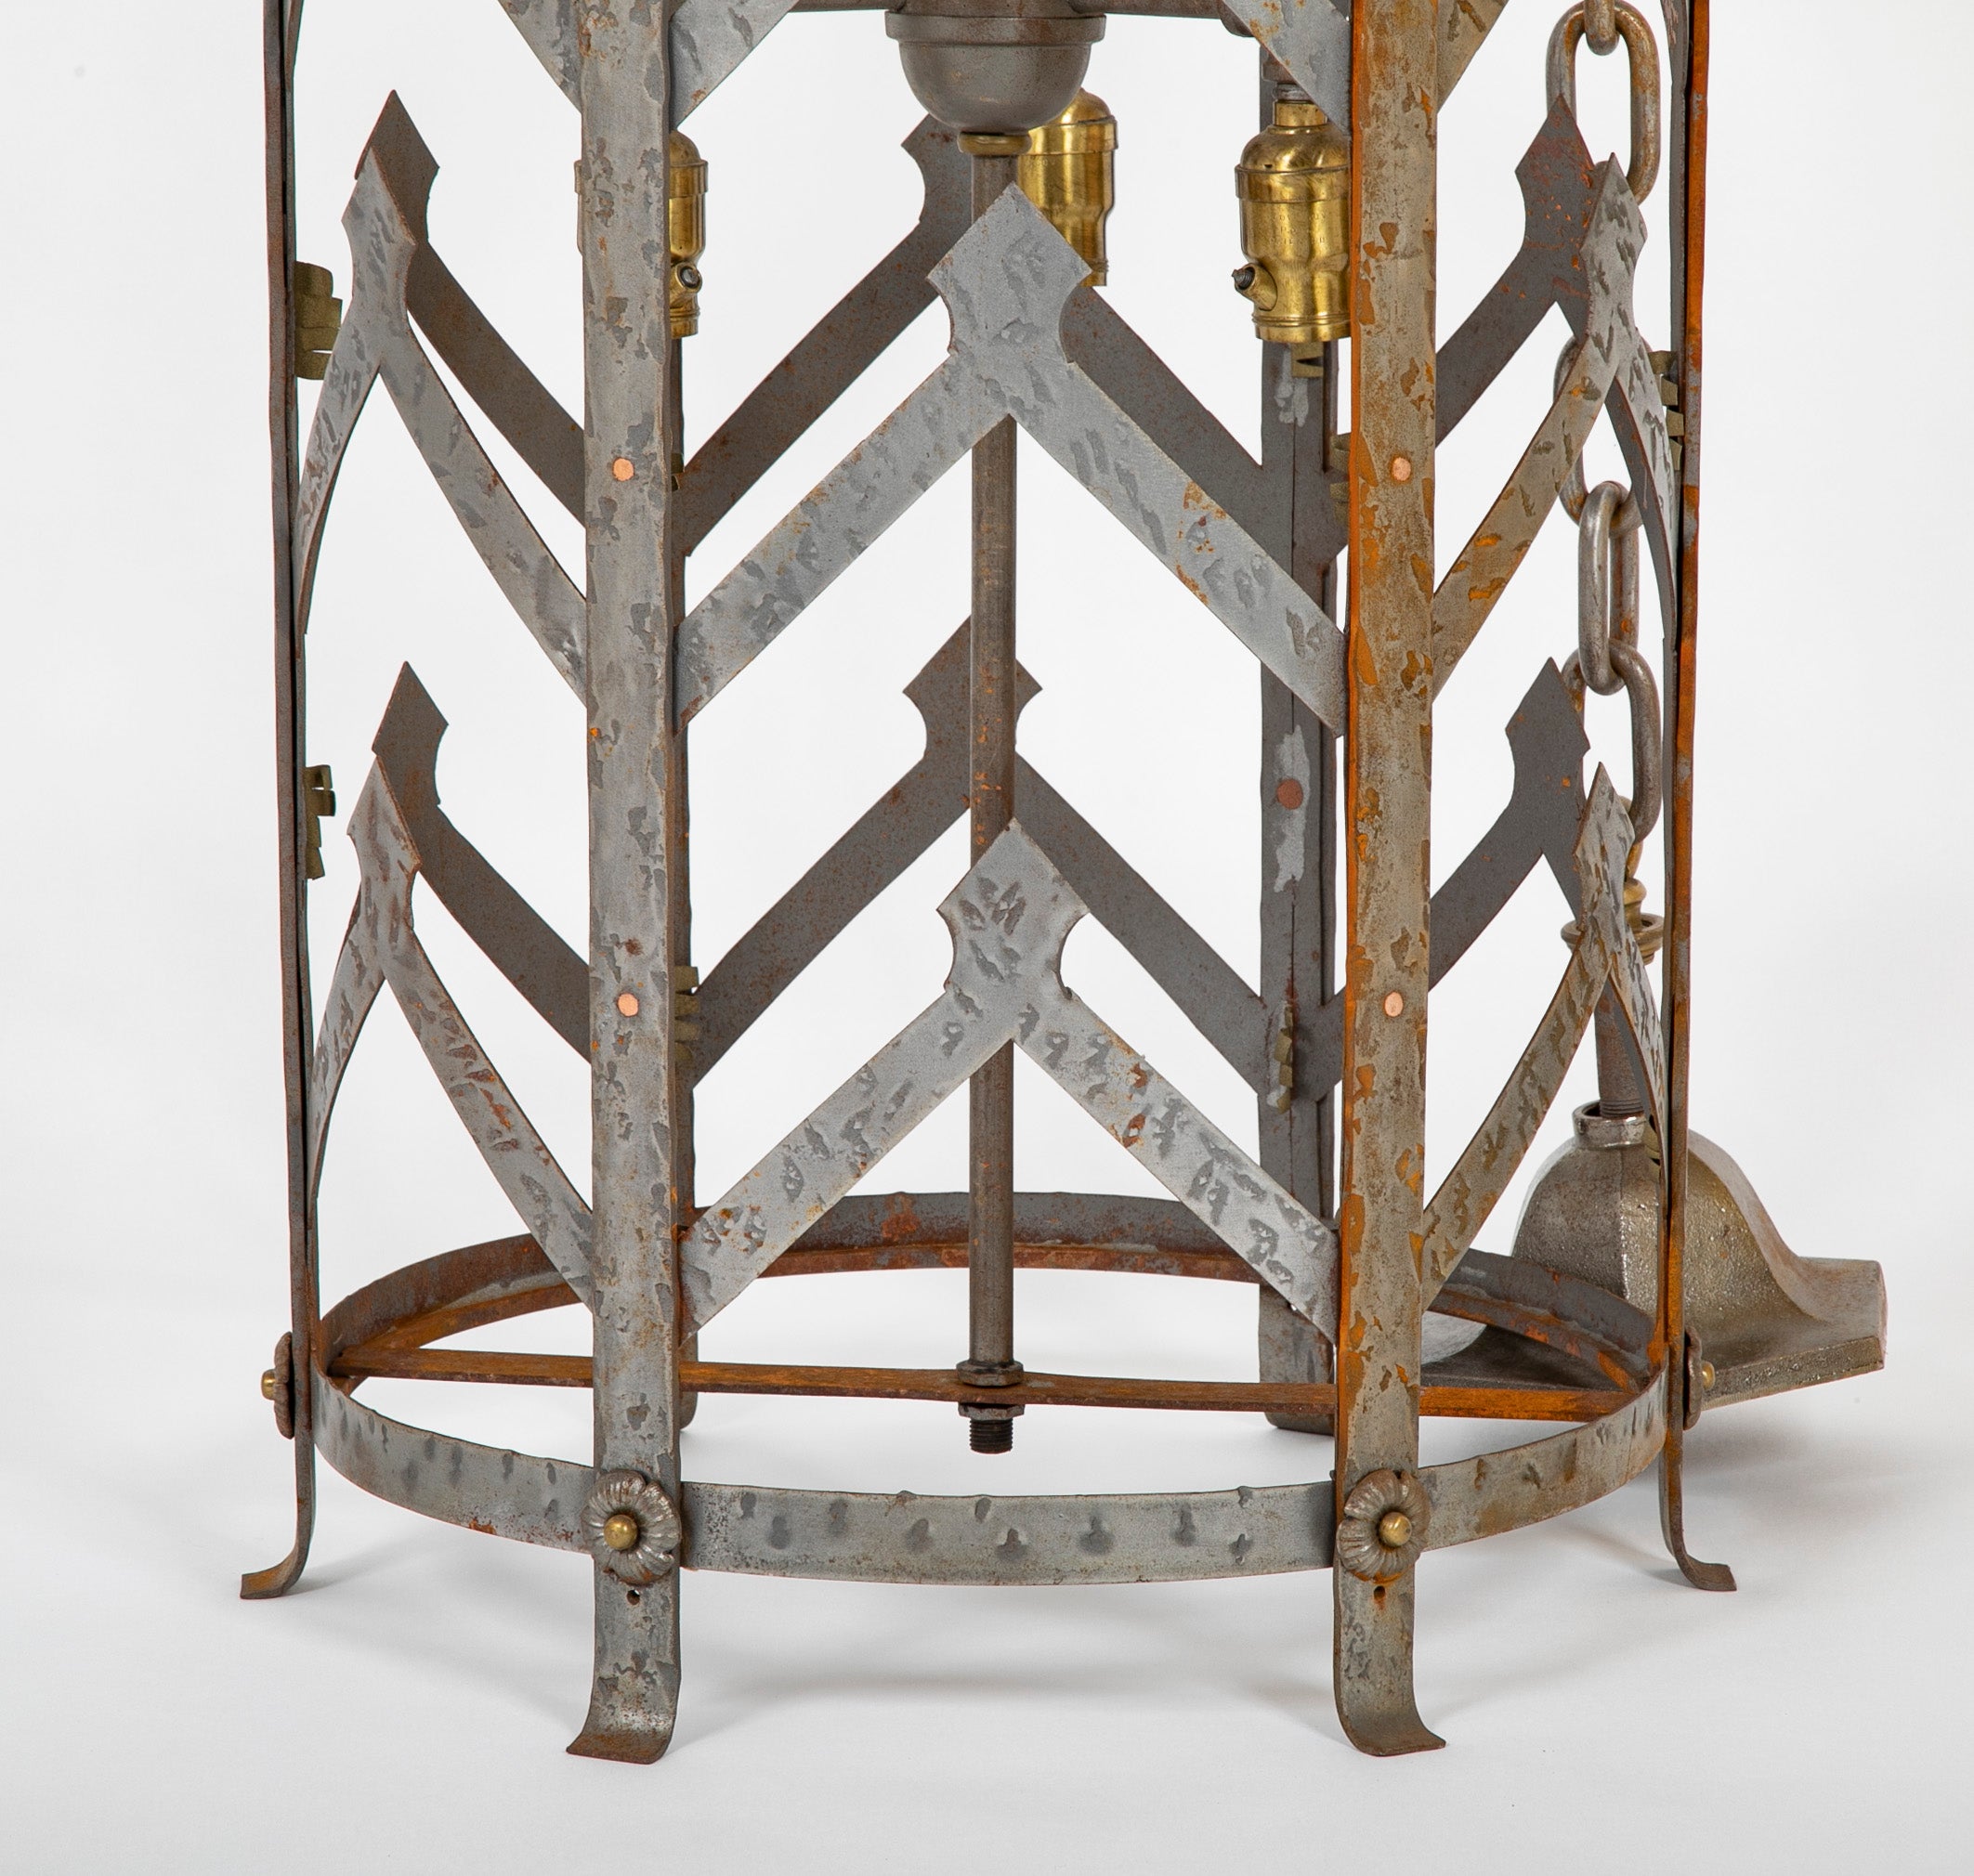 A Pair of Early 20th Century American Wrought Iron Lanterns